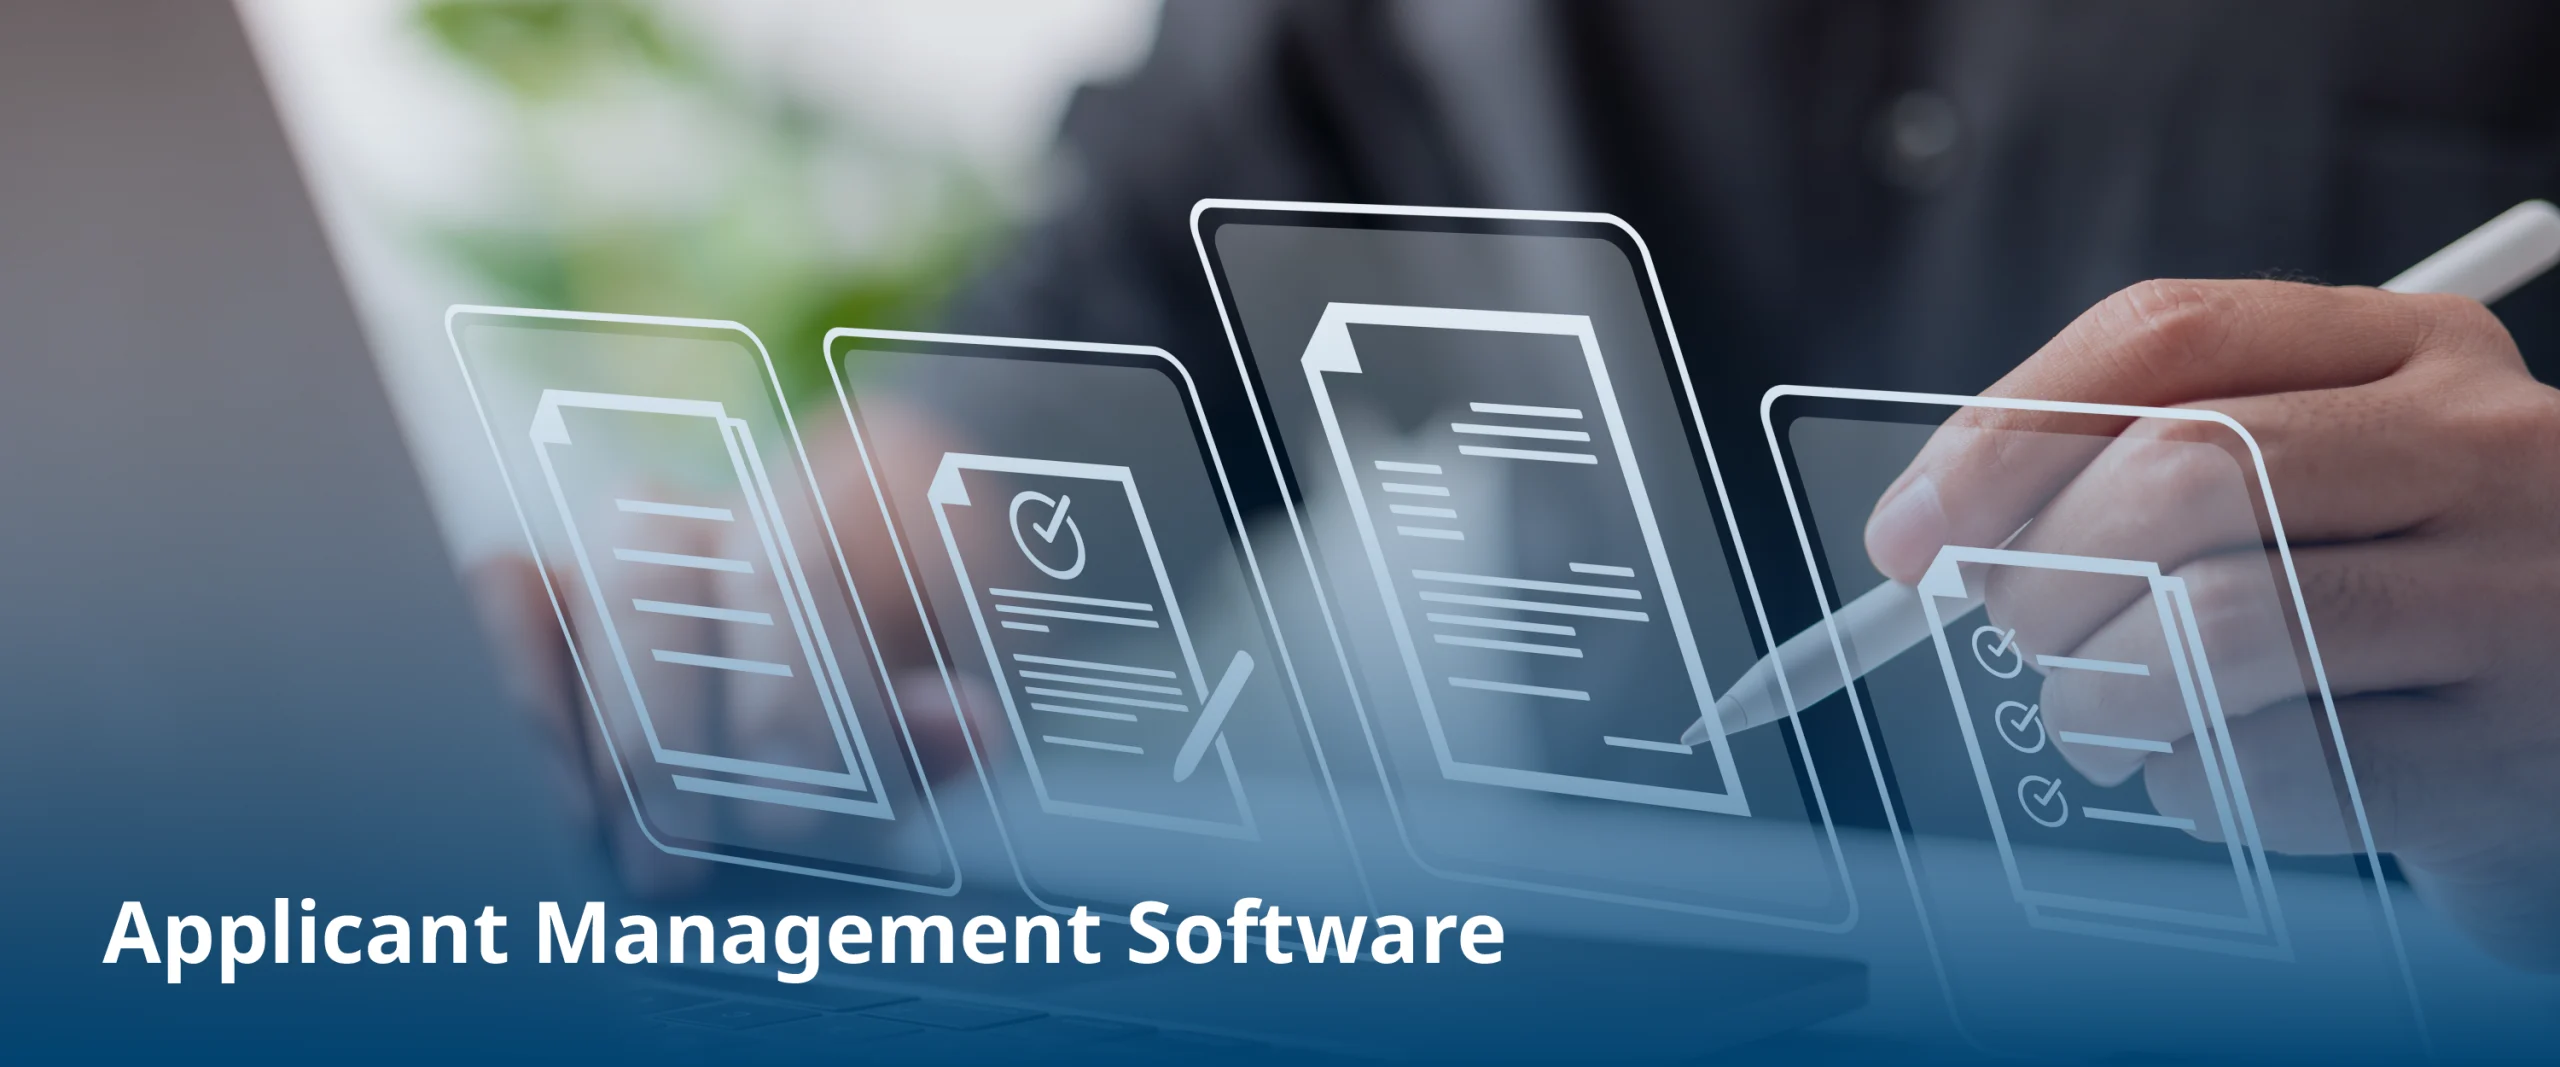 Applicant Management Software: Streamline and Optimize Your Hiring Workflow